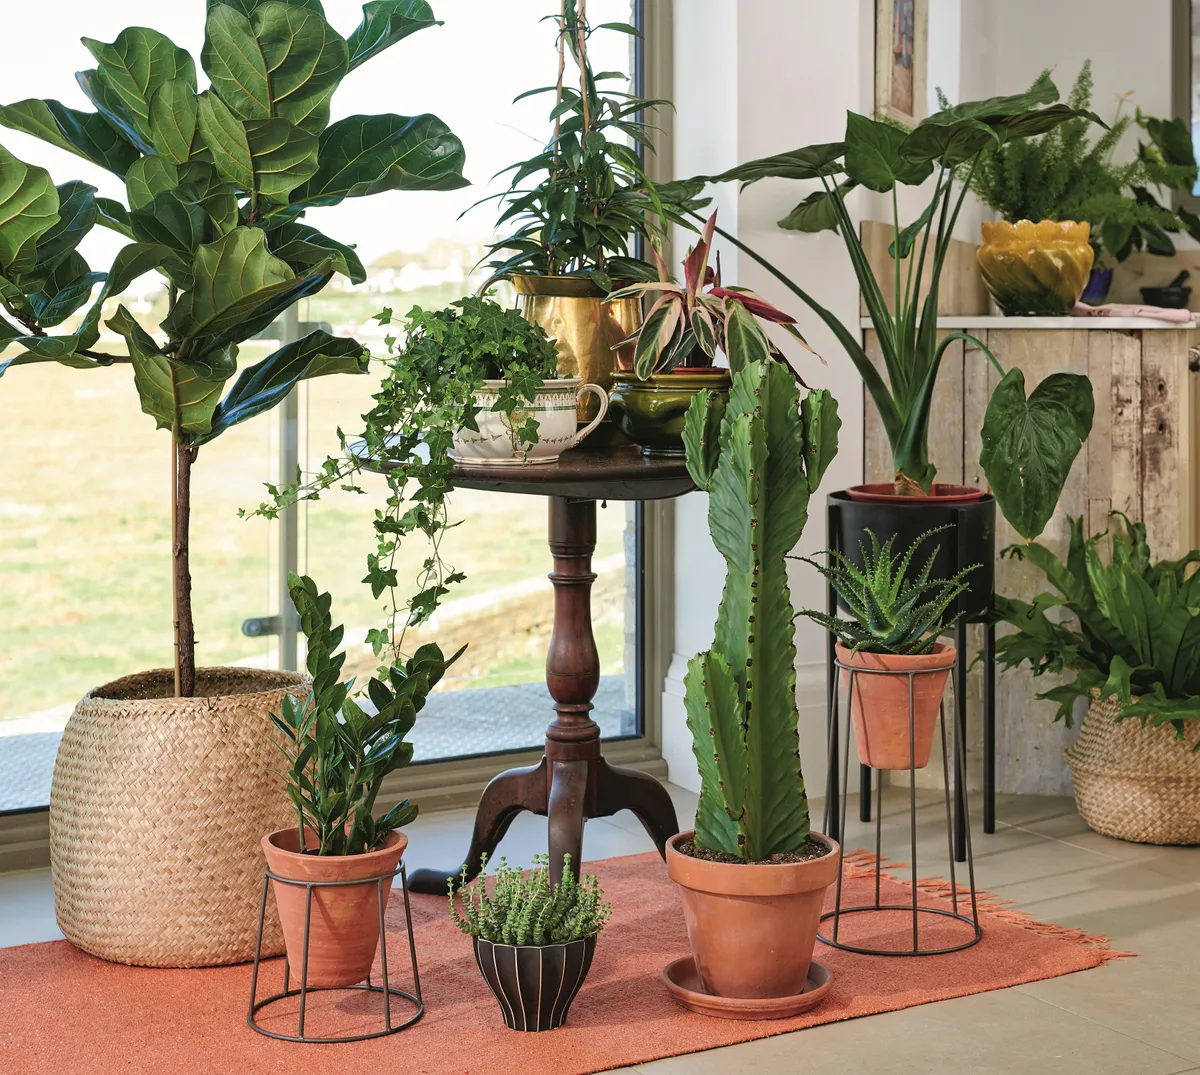 A display of plants, including a fiddle leaf fig, a trailing plant and a cacti, in front of sliding patio doors.